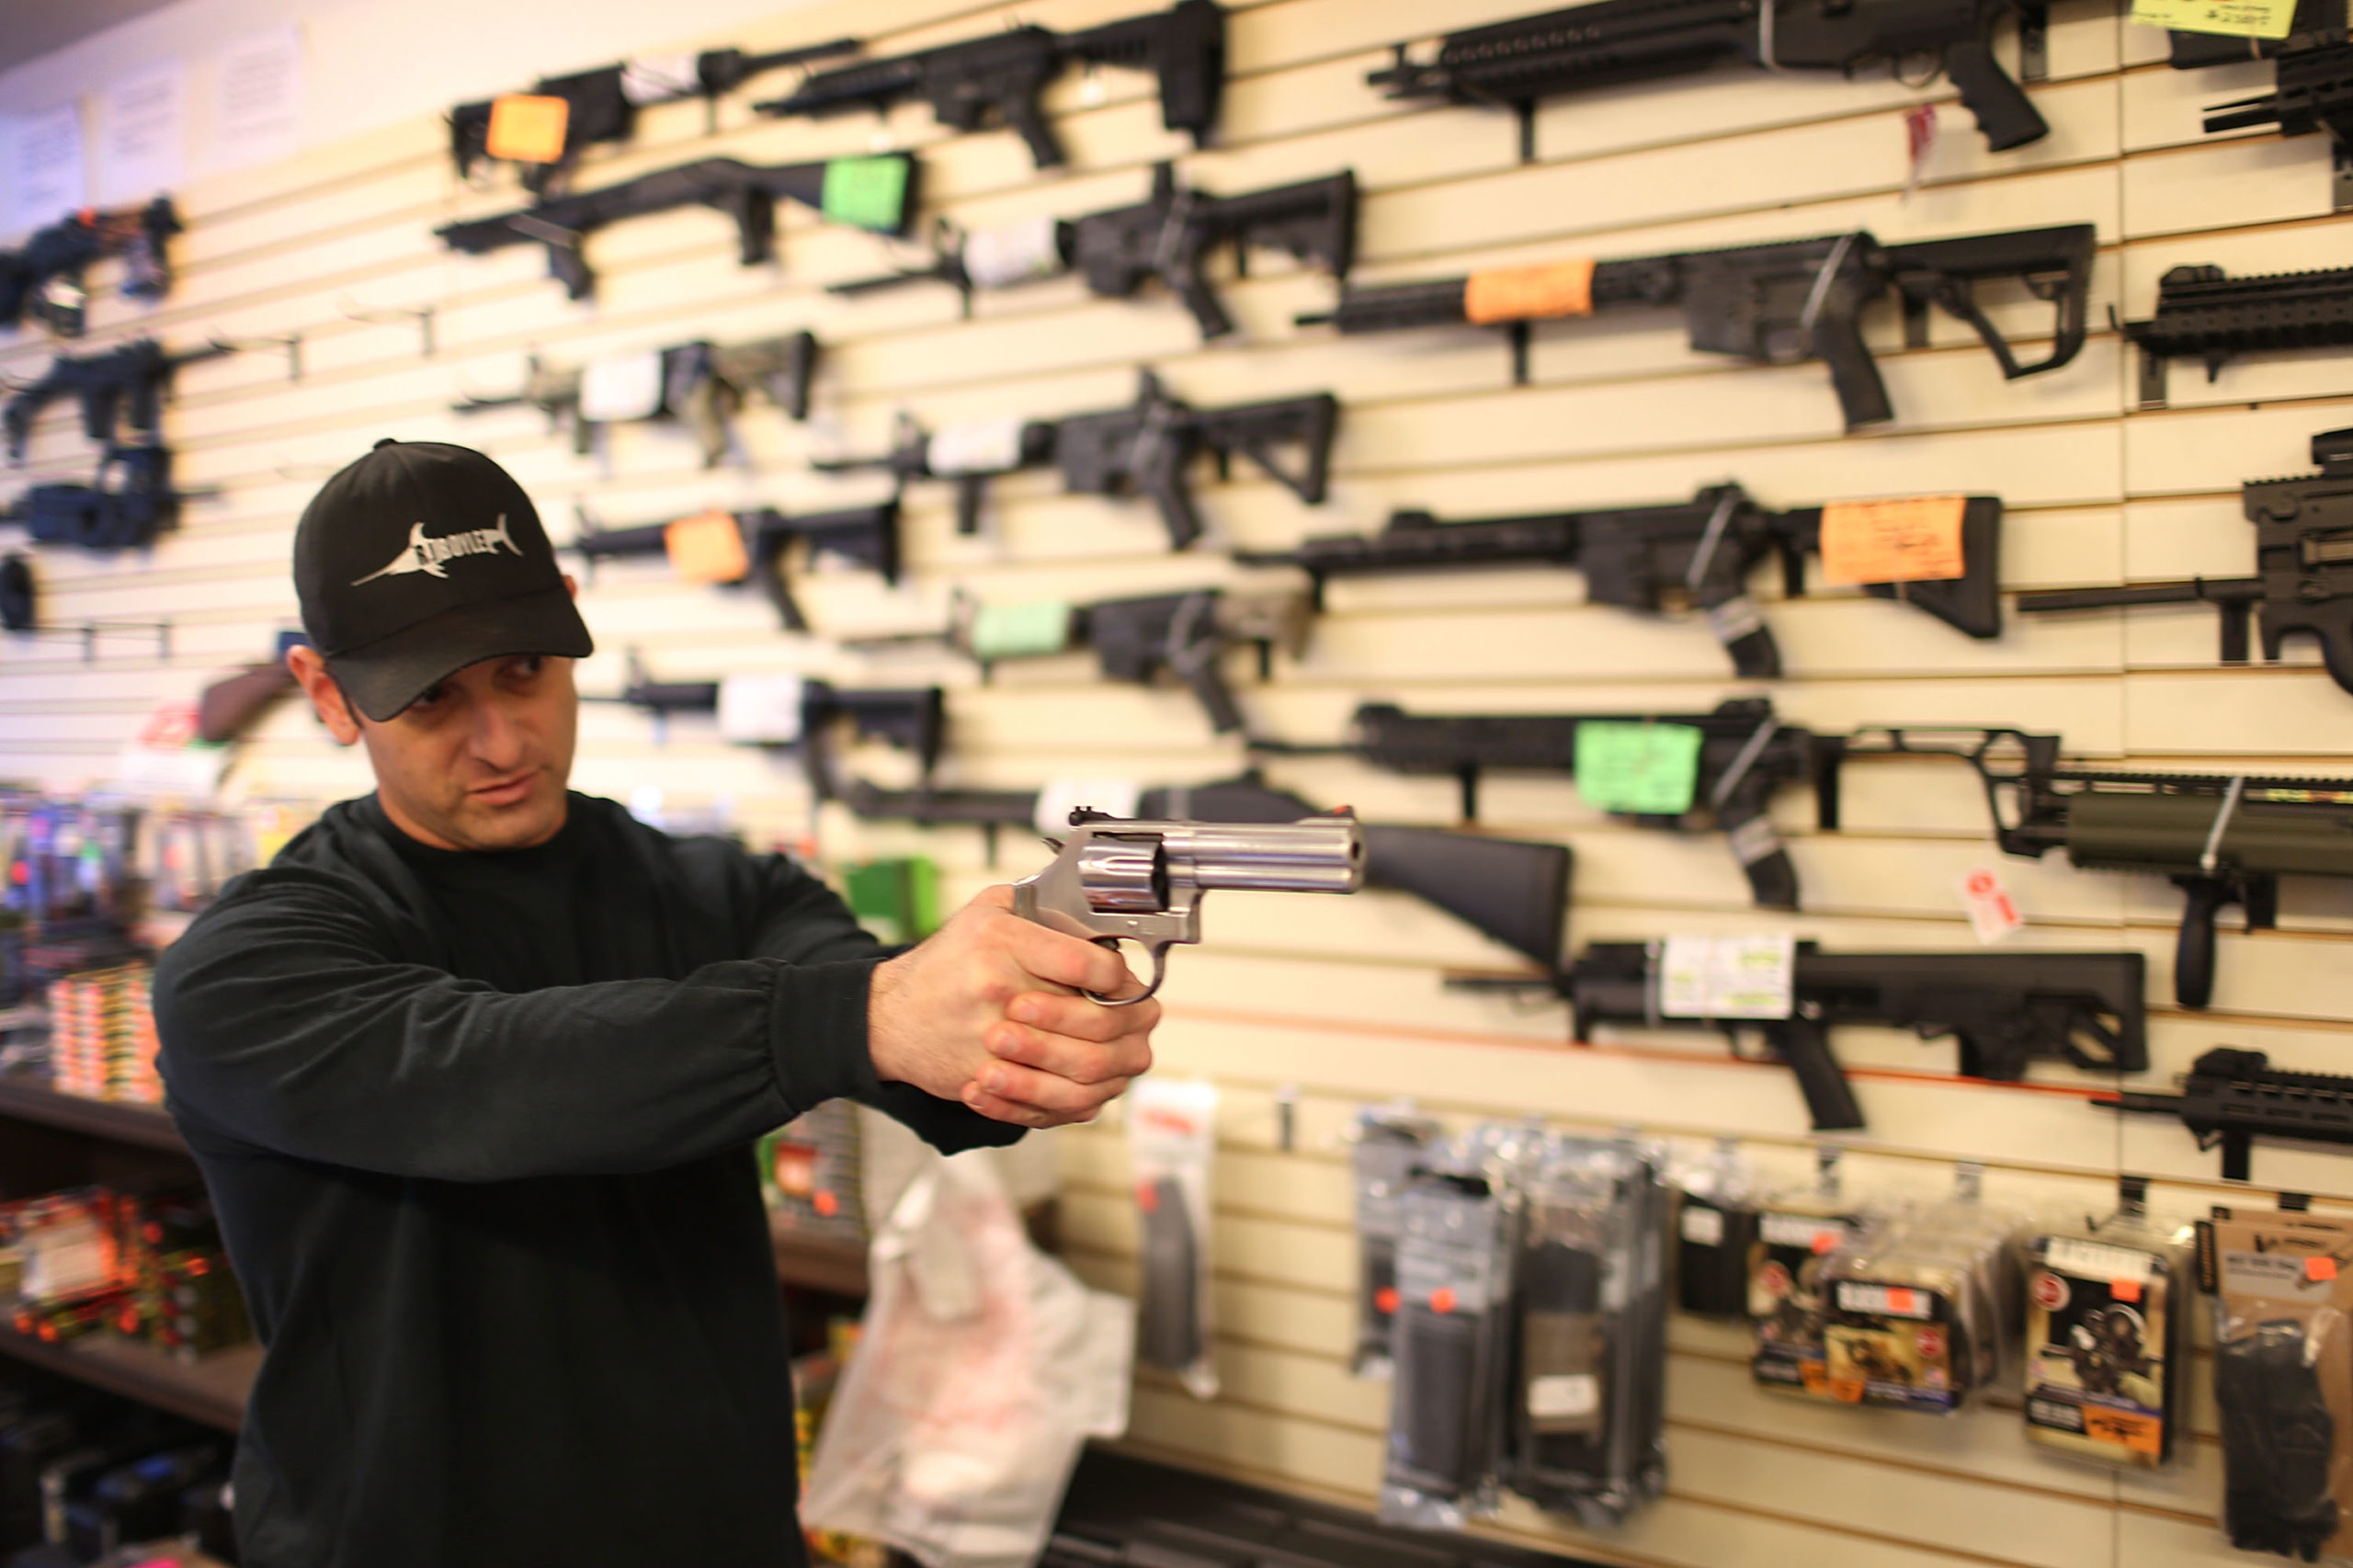 DELRAY BEACH, FL - JANUARY 05: Brandon Wexler shows a customer one of the weapons that she was picking up at the end of the three day waiting period at the K&W Gunworks store on the day that U.S. President Barack Obama in Washington, DC announced his executive action on guns on January 5, 2016 in Delray Beach, Florida. President Obama announced several measures that he says are intended to advance his gun safety agenda. (Photo by Joe Raedle/Getty Images)